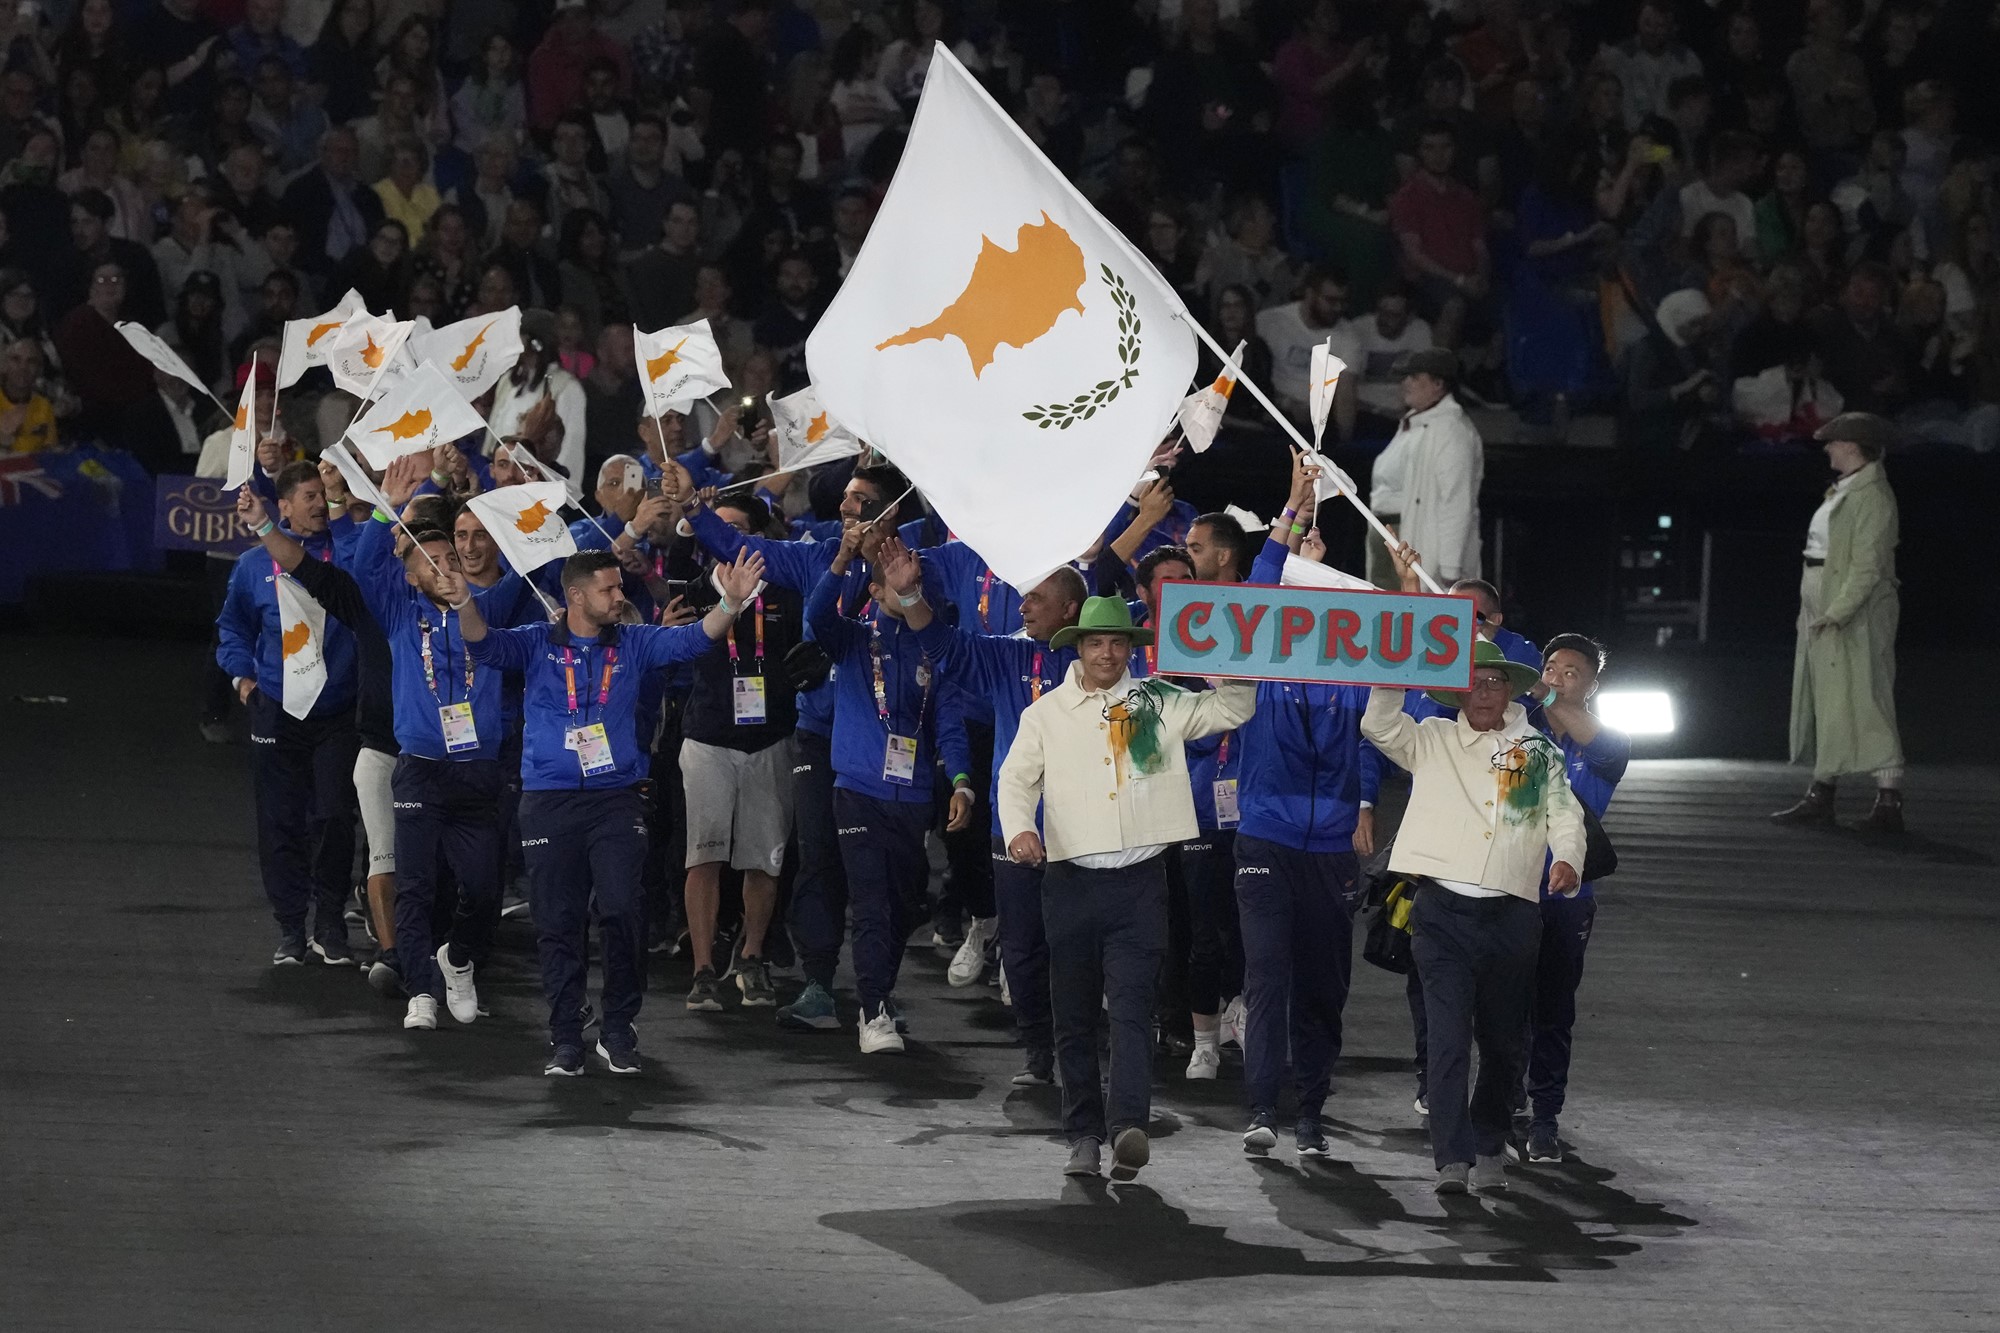 People march behind the Cyprus flag